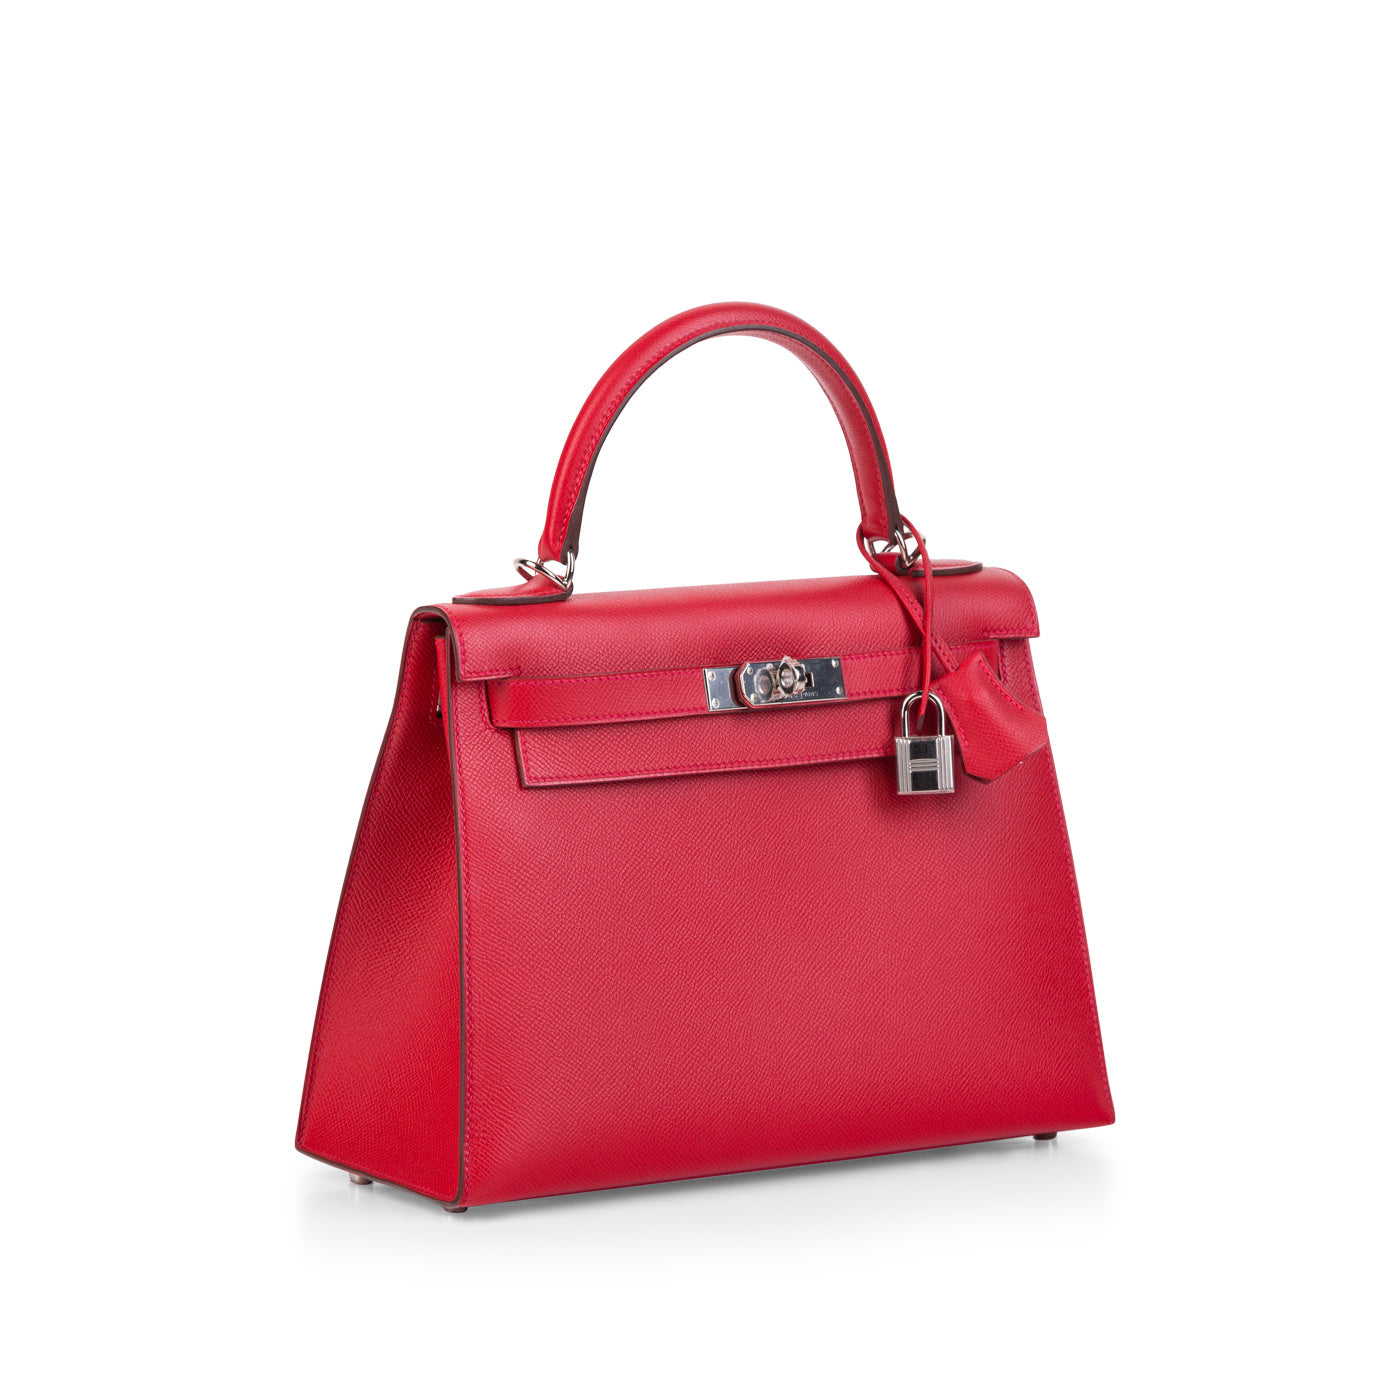 Ginza Xiaoma - The Kelly 28 in Rouge Casaque Epsom leather